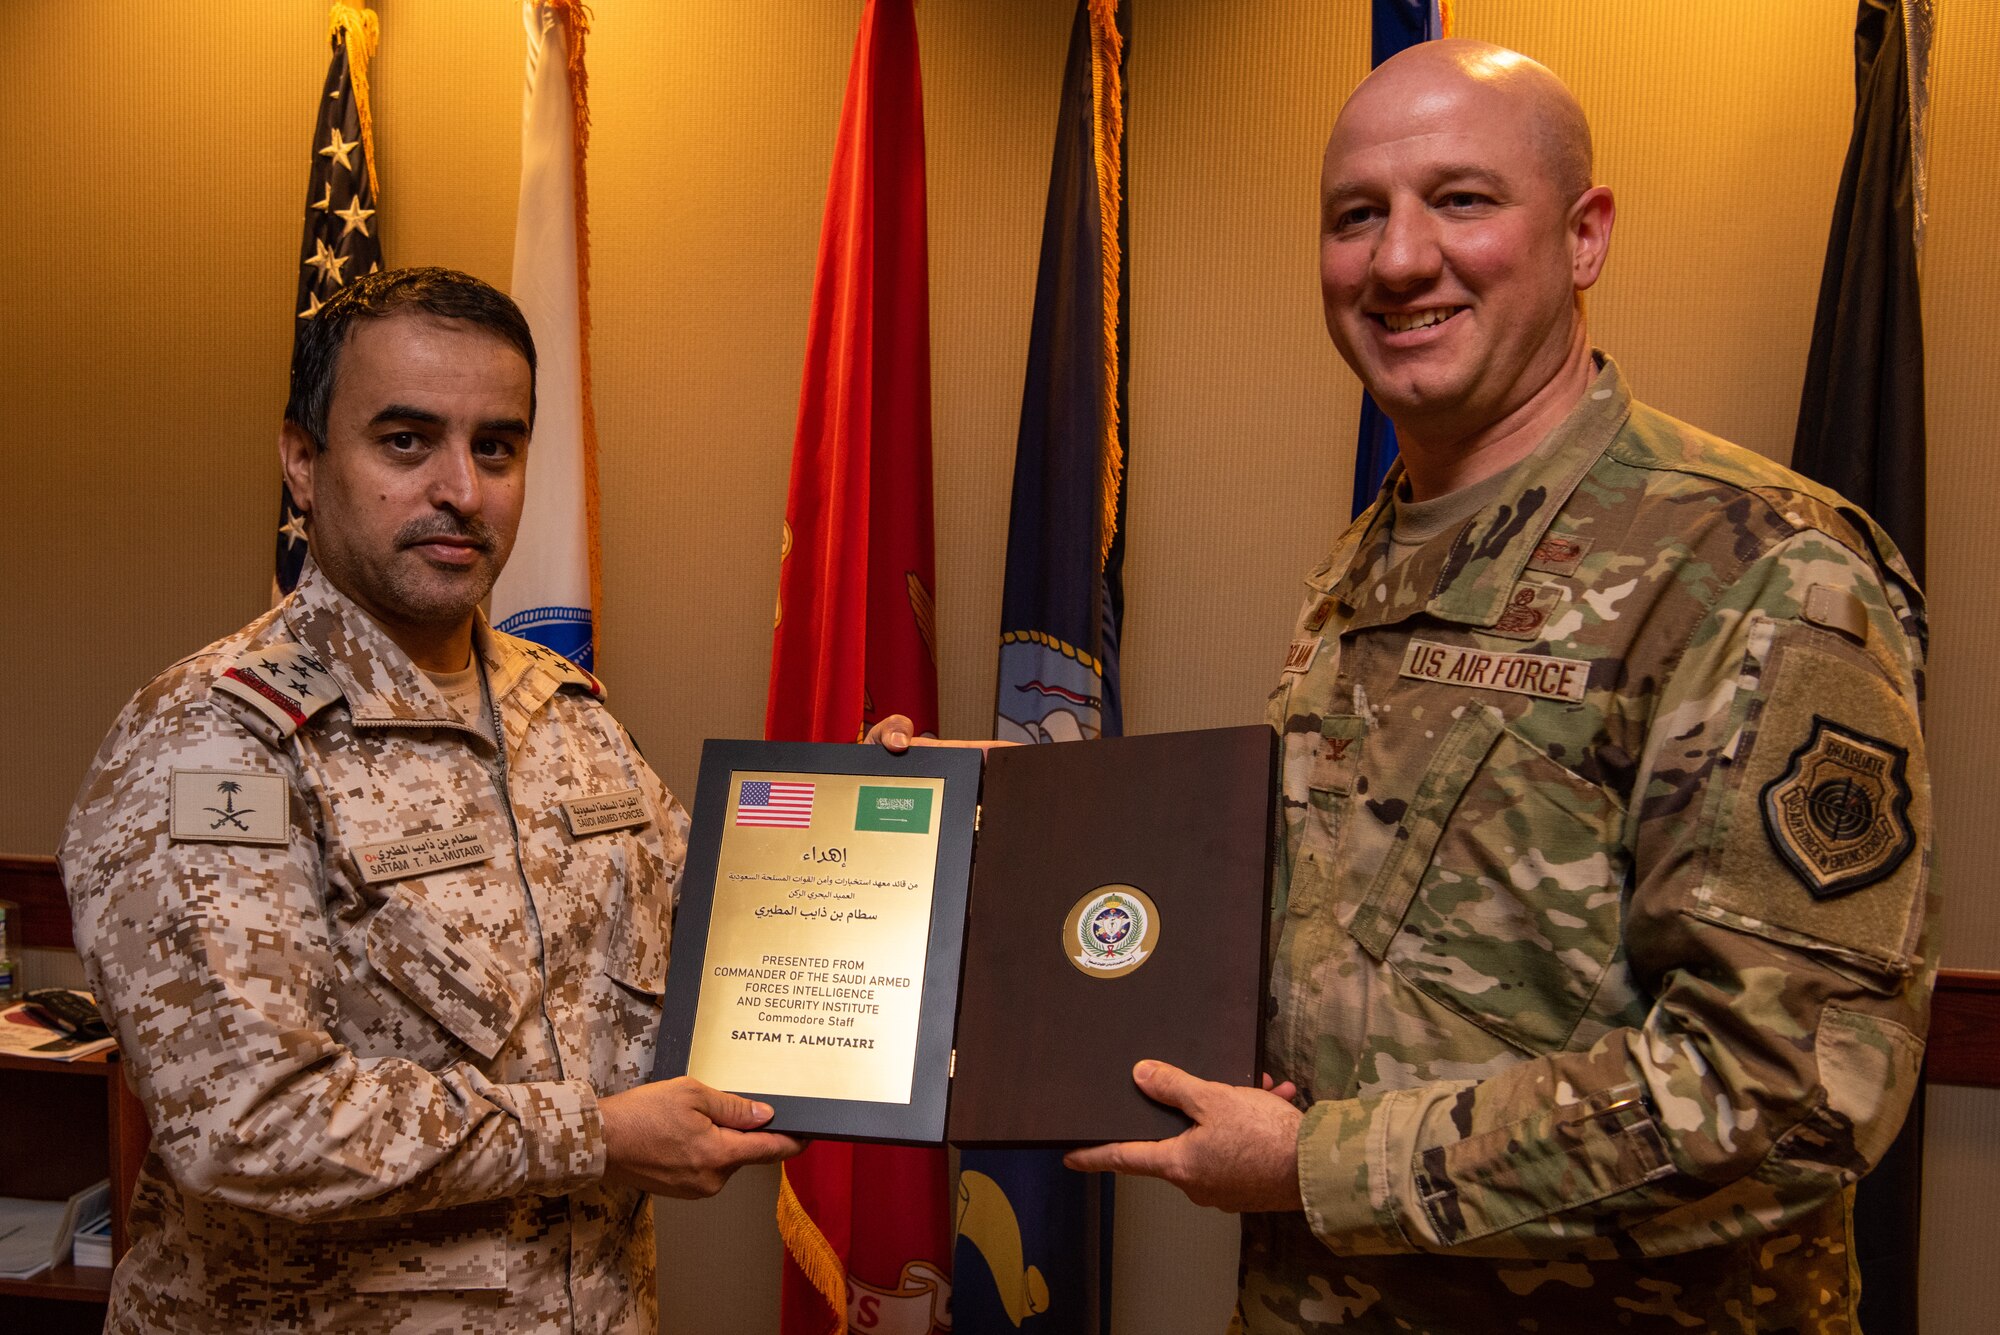 Royal Saudi Air Forces Commodore Al Mutairi Sattam Thaib, Armed Forces Intel and Security Institute commander, presents a gift to U.S. Air Force Col. Matthew Reilman, 17th Training Wing commander, Goodfellow Air Force Base, May 18, 2022. Members of the RSAF visited Goodfellow AFB to learn about the joint and coalition forces intelligence, surveillance, and reconnaissance training provided by the 17th TRW. (U.S. Air Force Photo by Senior Airman Michael Bowman)